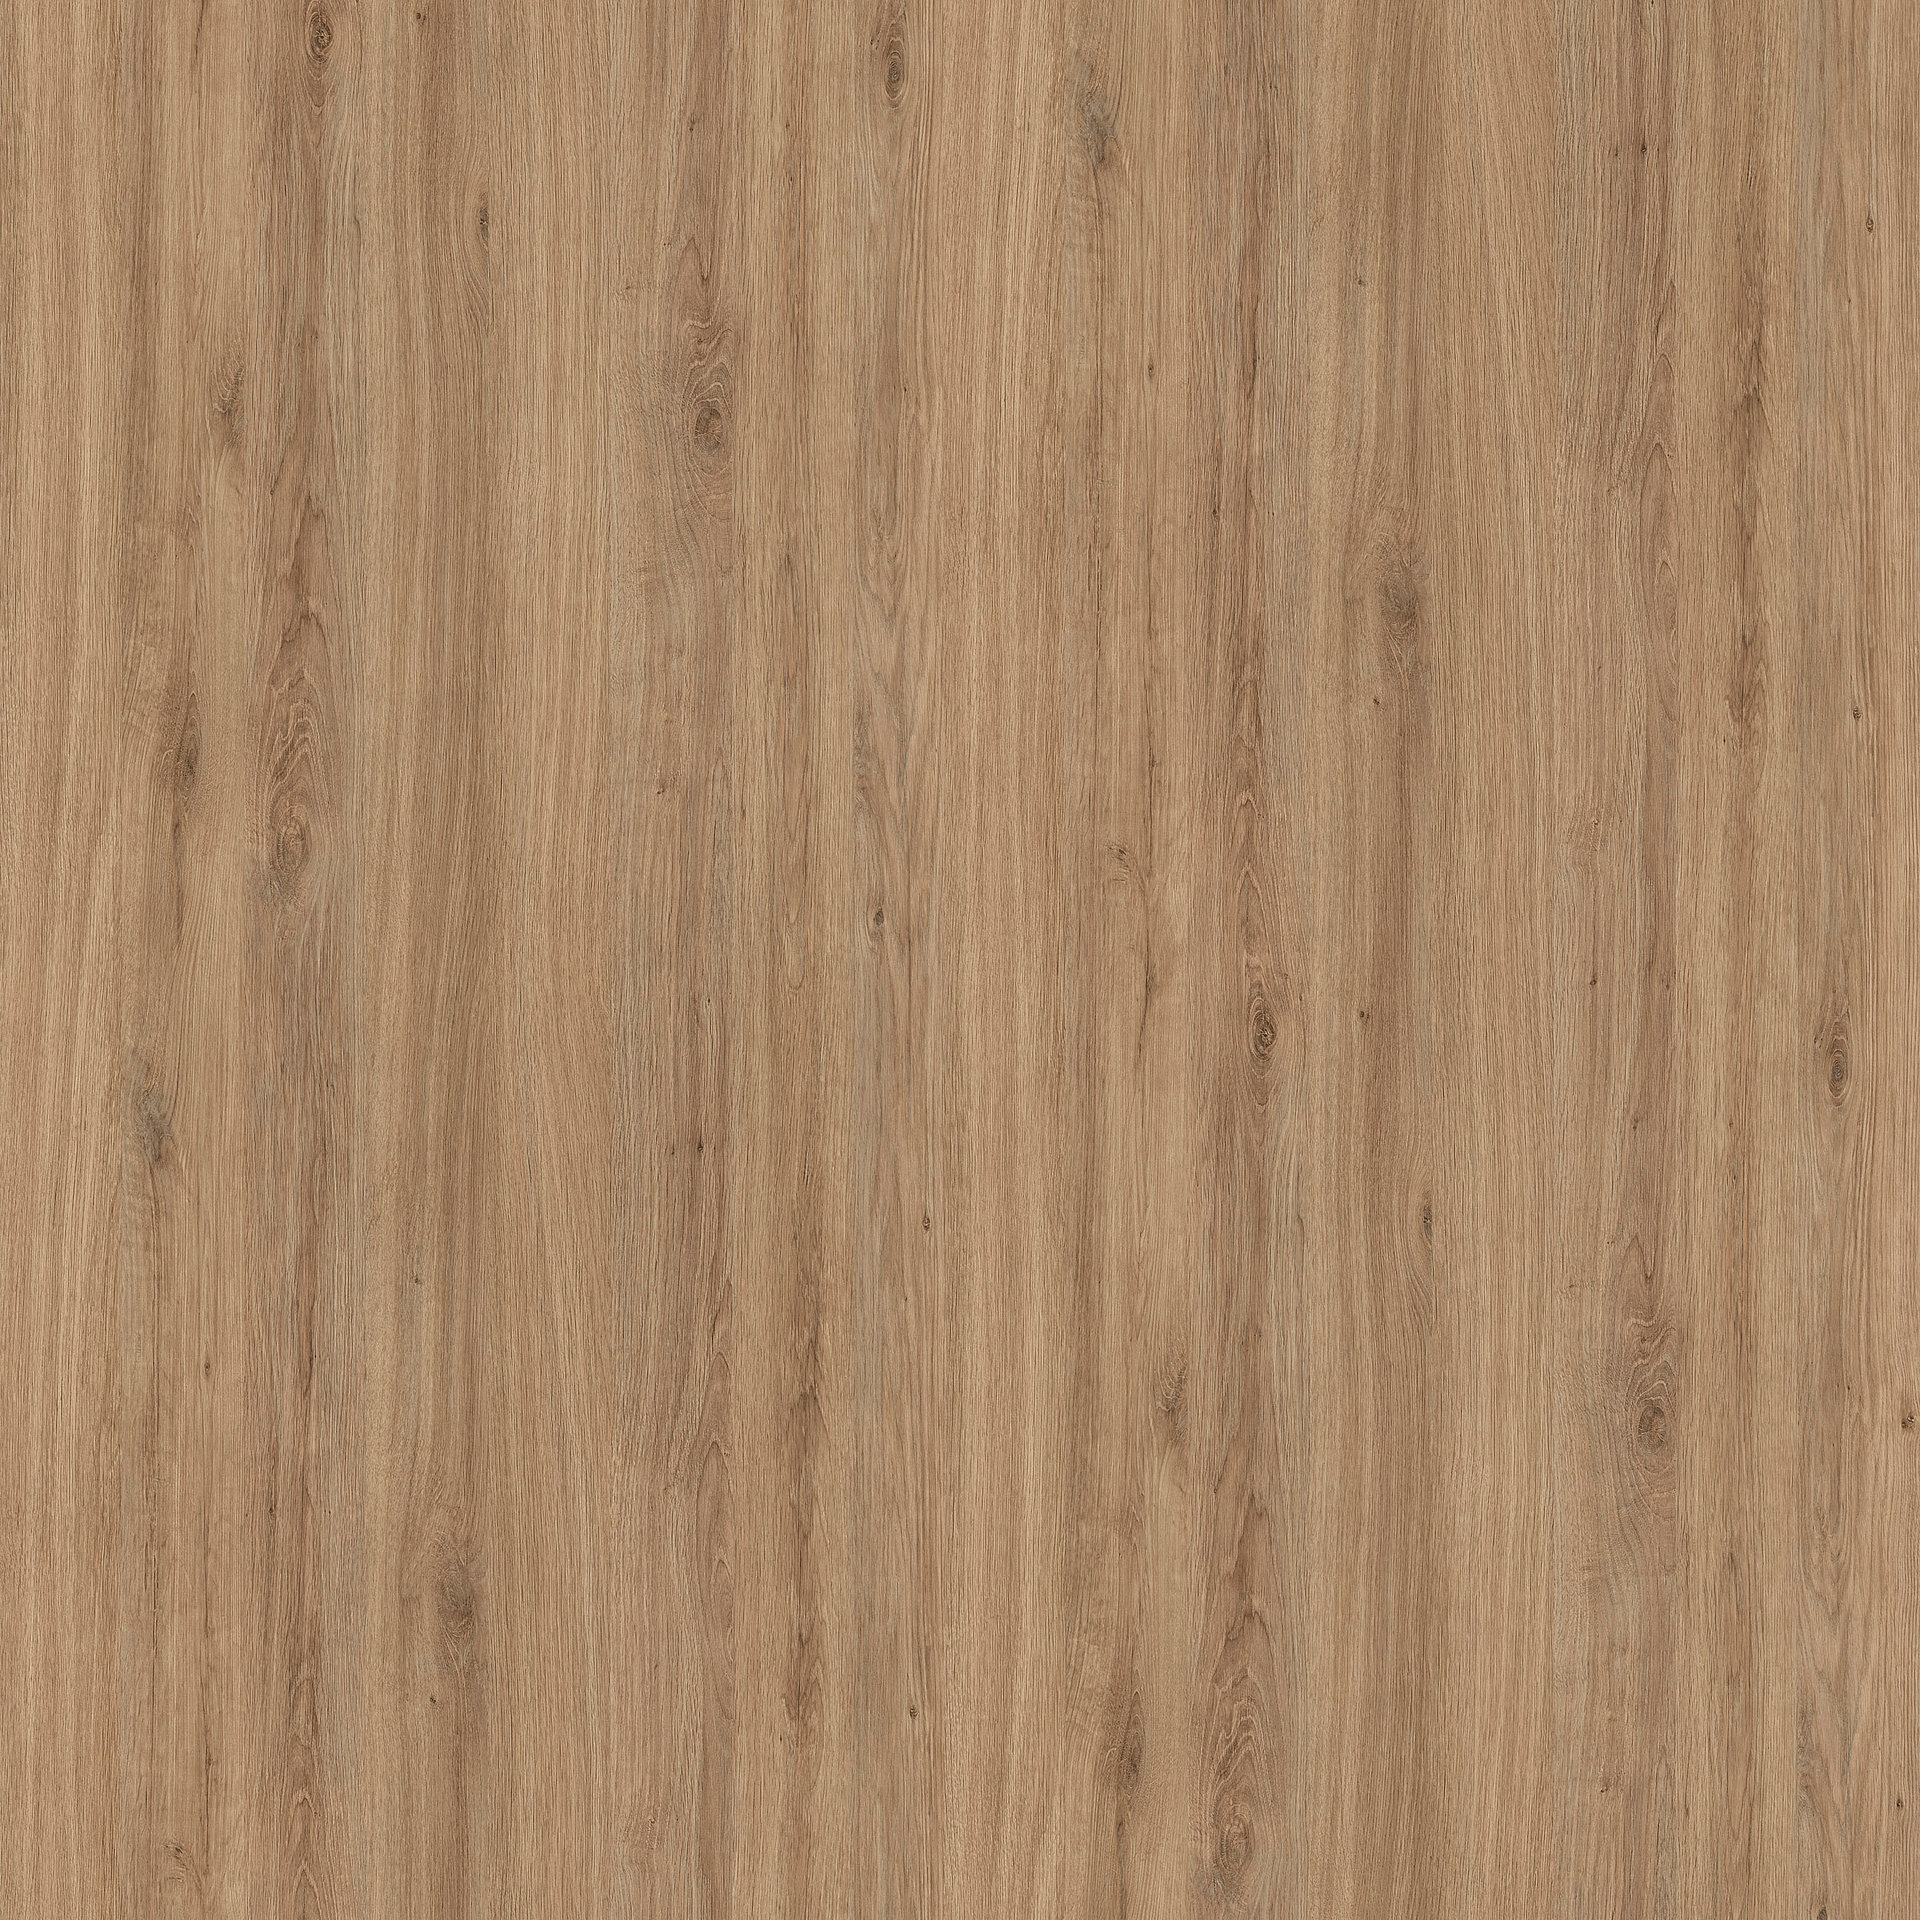 DecoBoard P2 - R 20038 MO Rovere Chalet Naturale (OLD R 4284)  28 mm - 2800 x 2100 mm